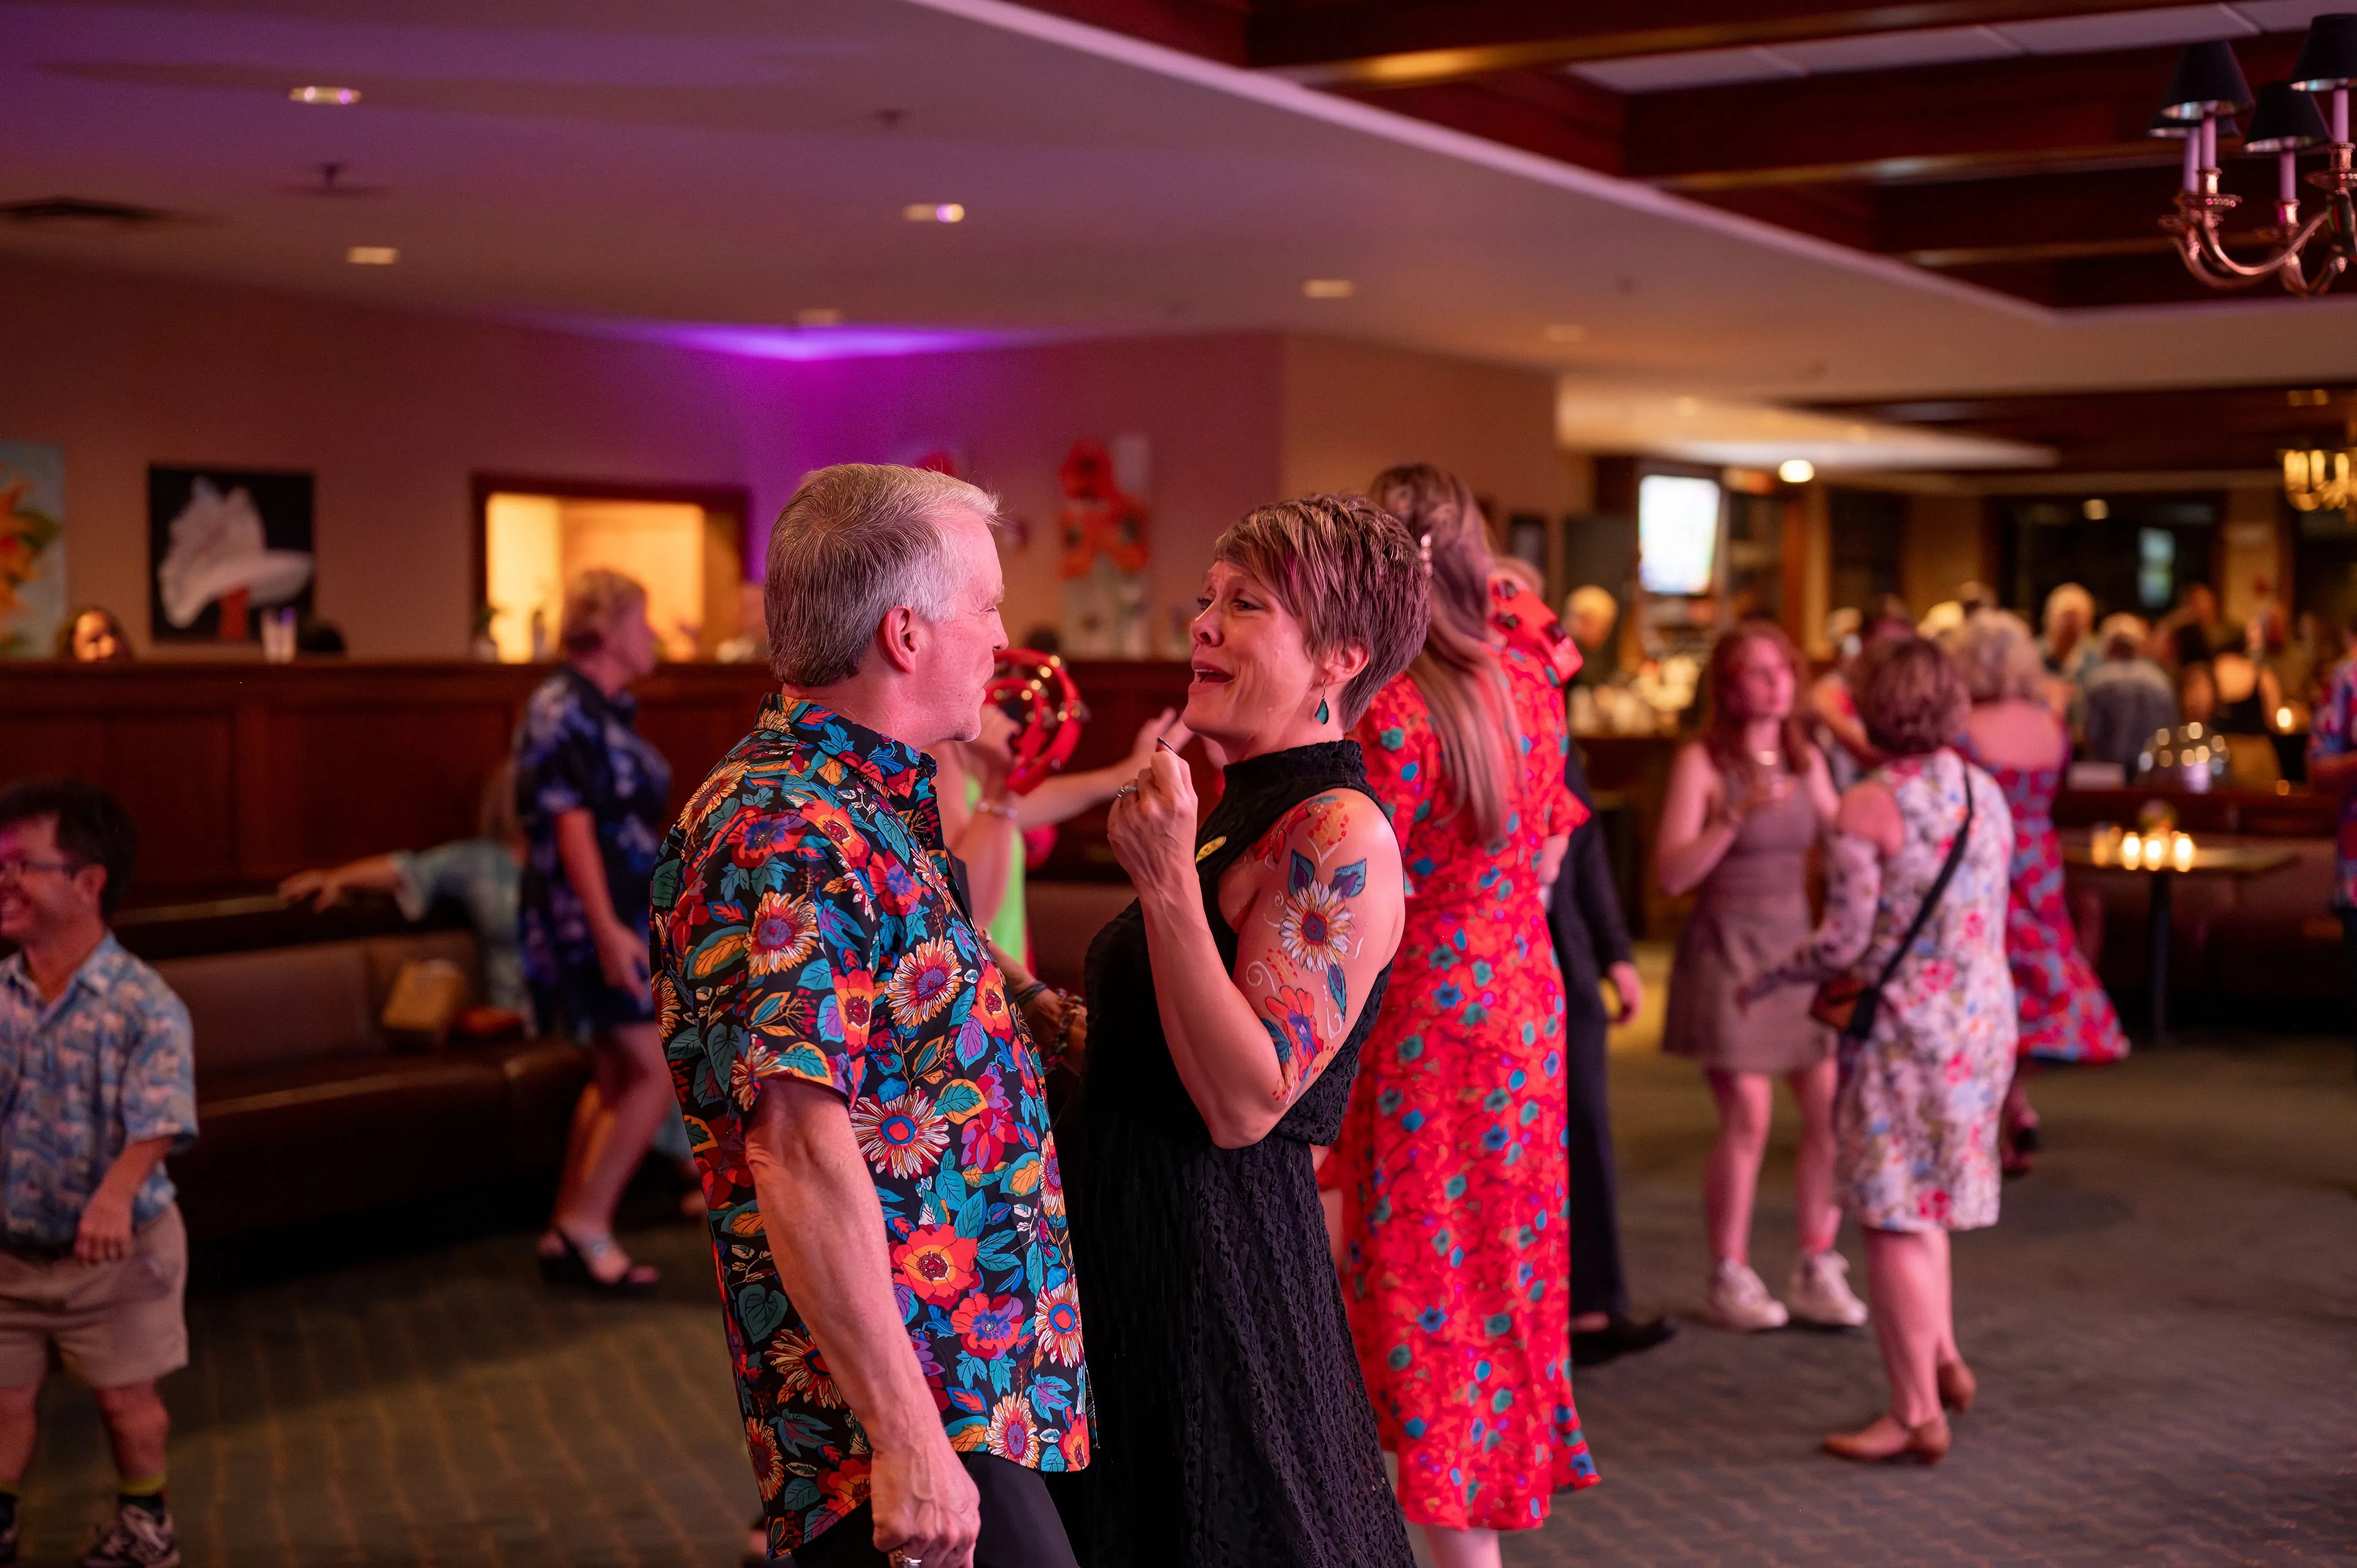 Guests dancing and socializing at an indoor evening event.